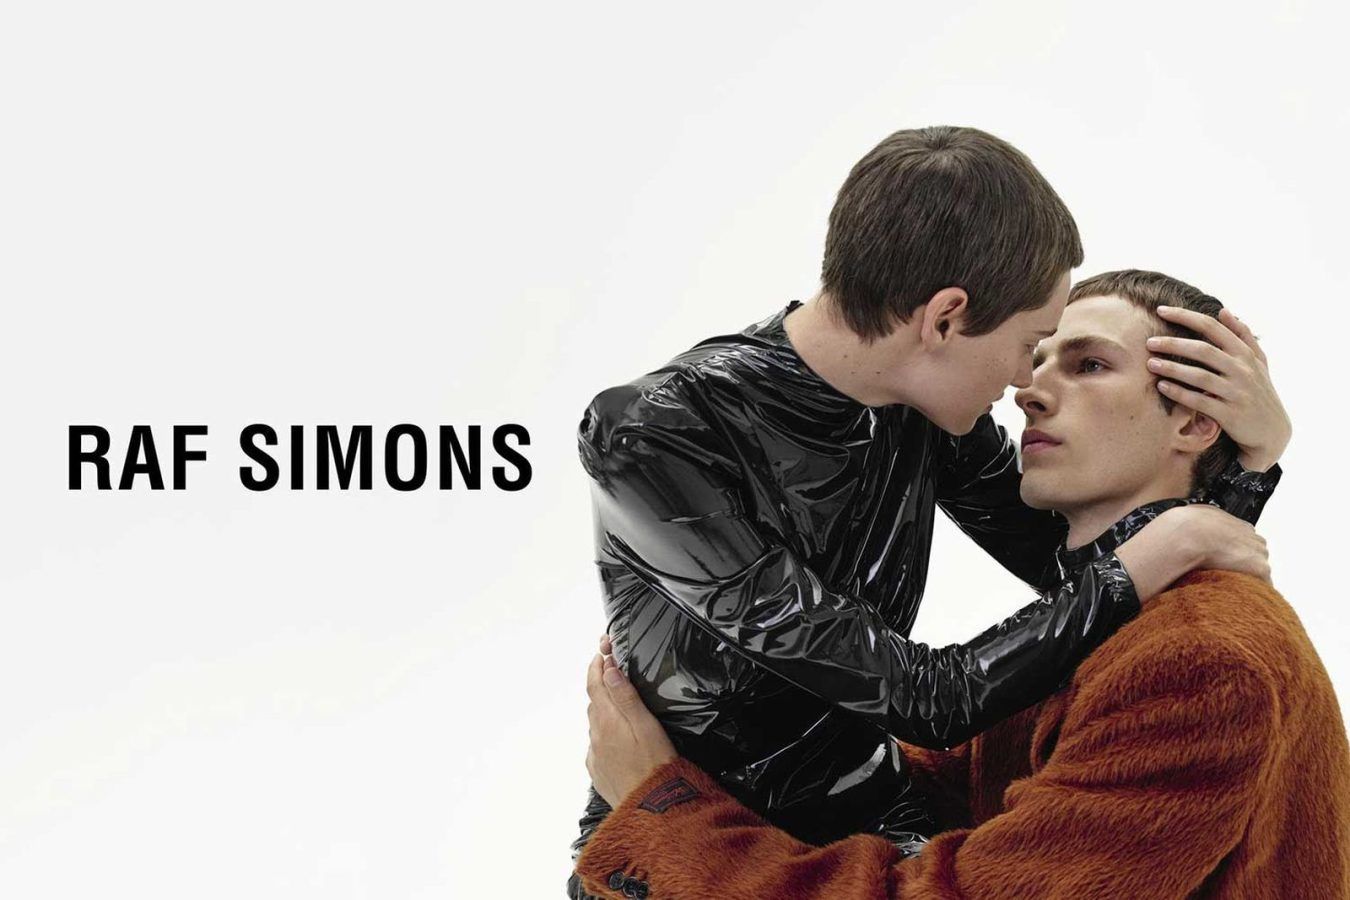 https://images.lifestyleasia.com/wp-content/uploads/sites/6/2022/11/22130435/raf-simons-fw22-collection-mens-campaign-0-1350x900.jpg